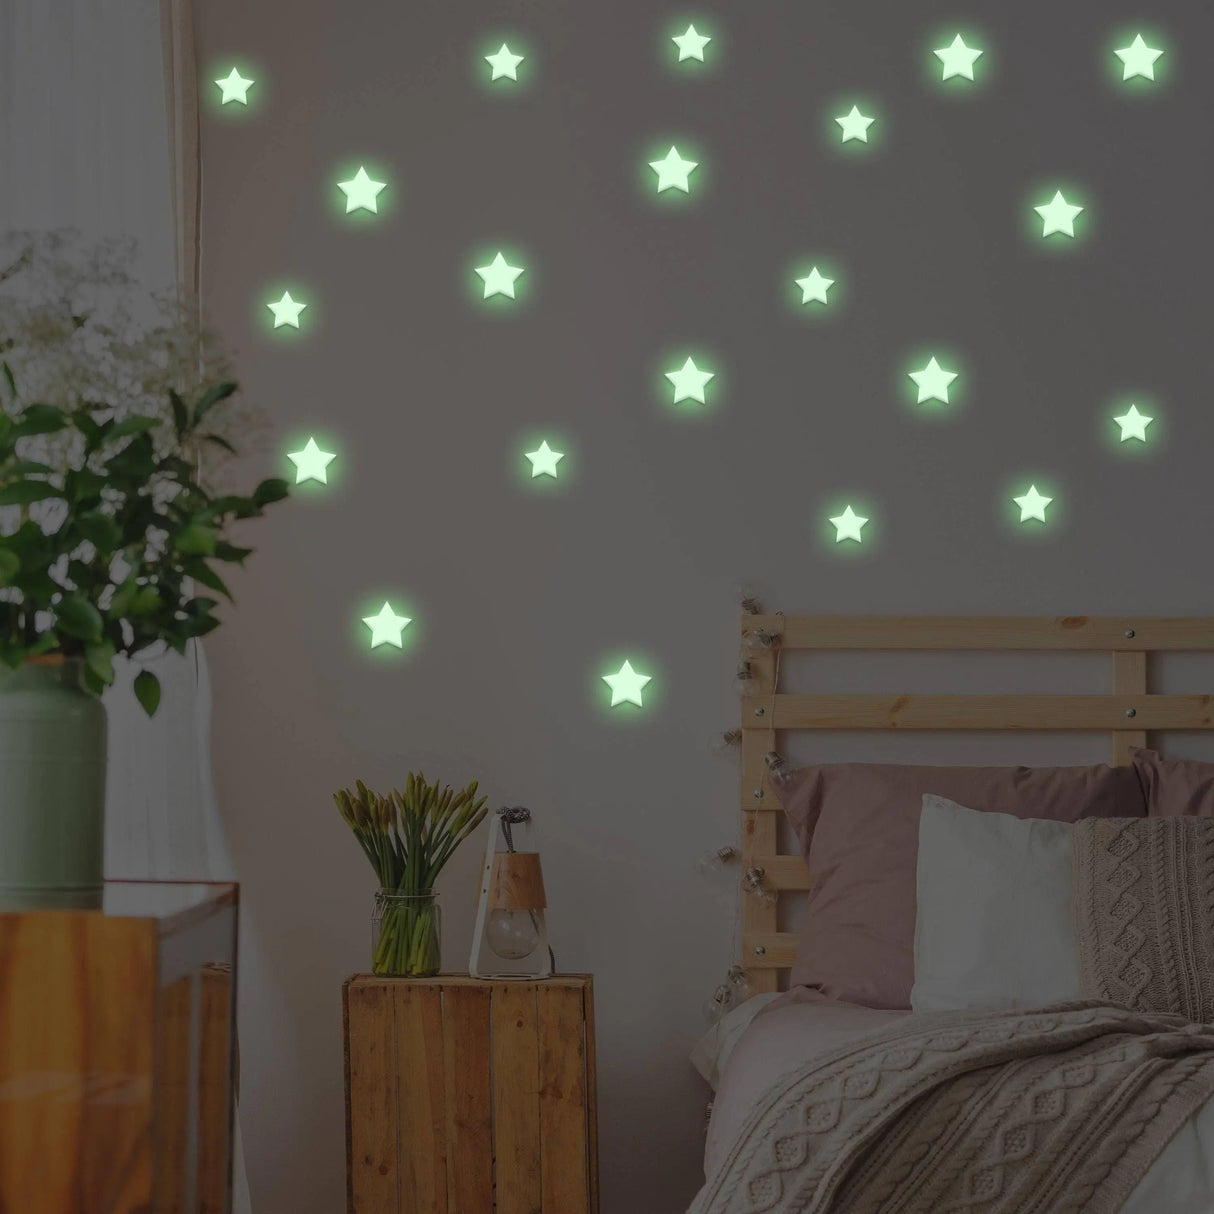 850 pcs Glow In The Dark Stars Stickers - The Star Glowing Ceiling Decals For Wall Room Kids Decor - Night Light Sky Realistic Stars Stick - Decords